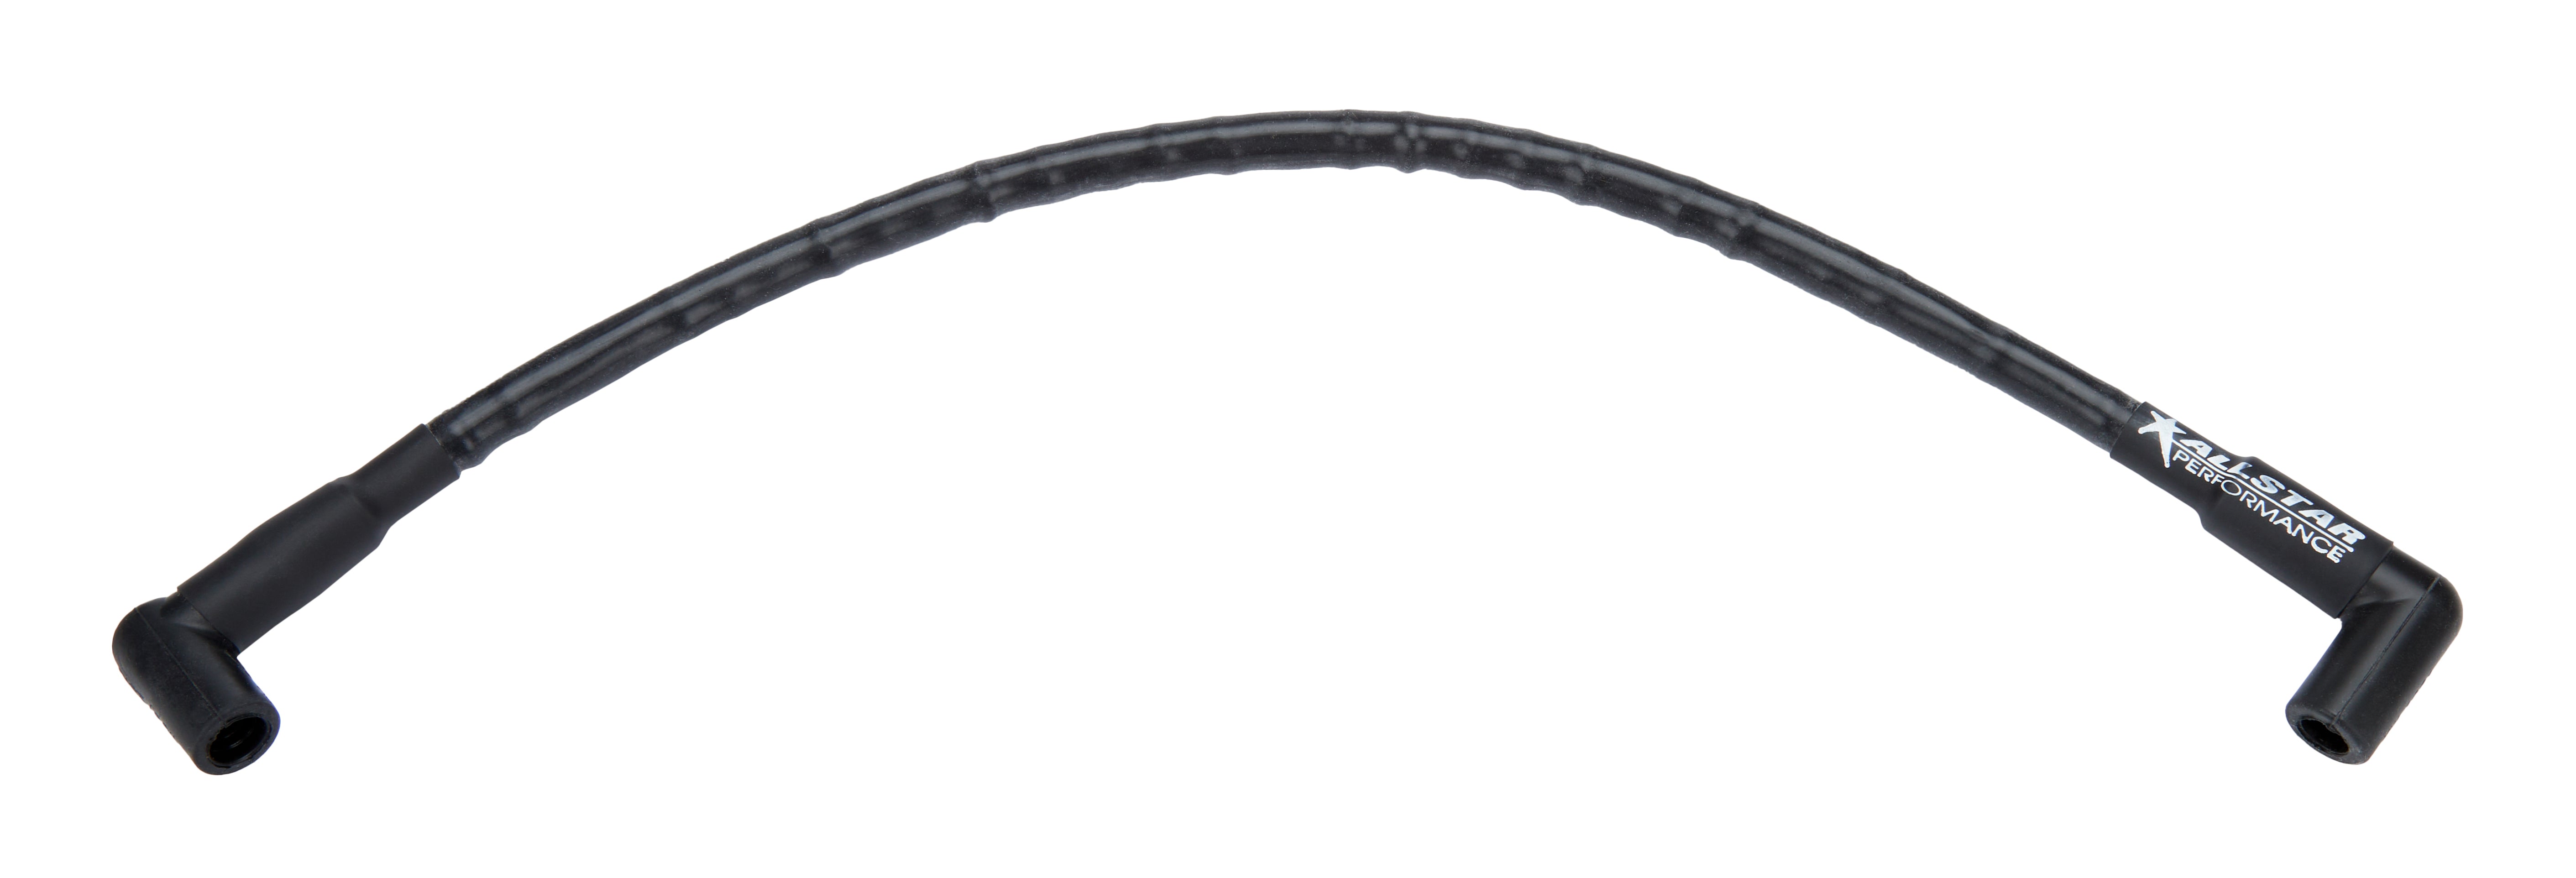 Allstar Performance Coil Wire w/ Sleeving 24in Ignition Components Ignition Coil Wires main image